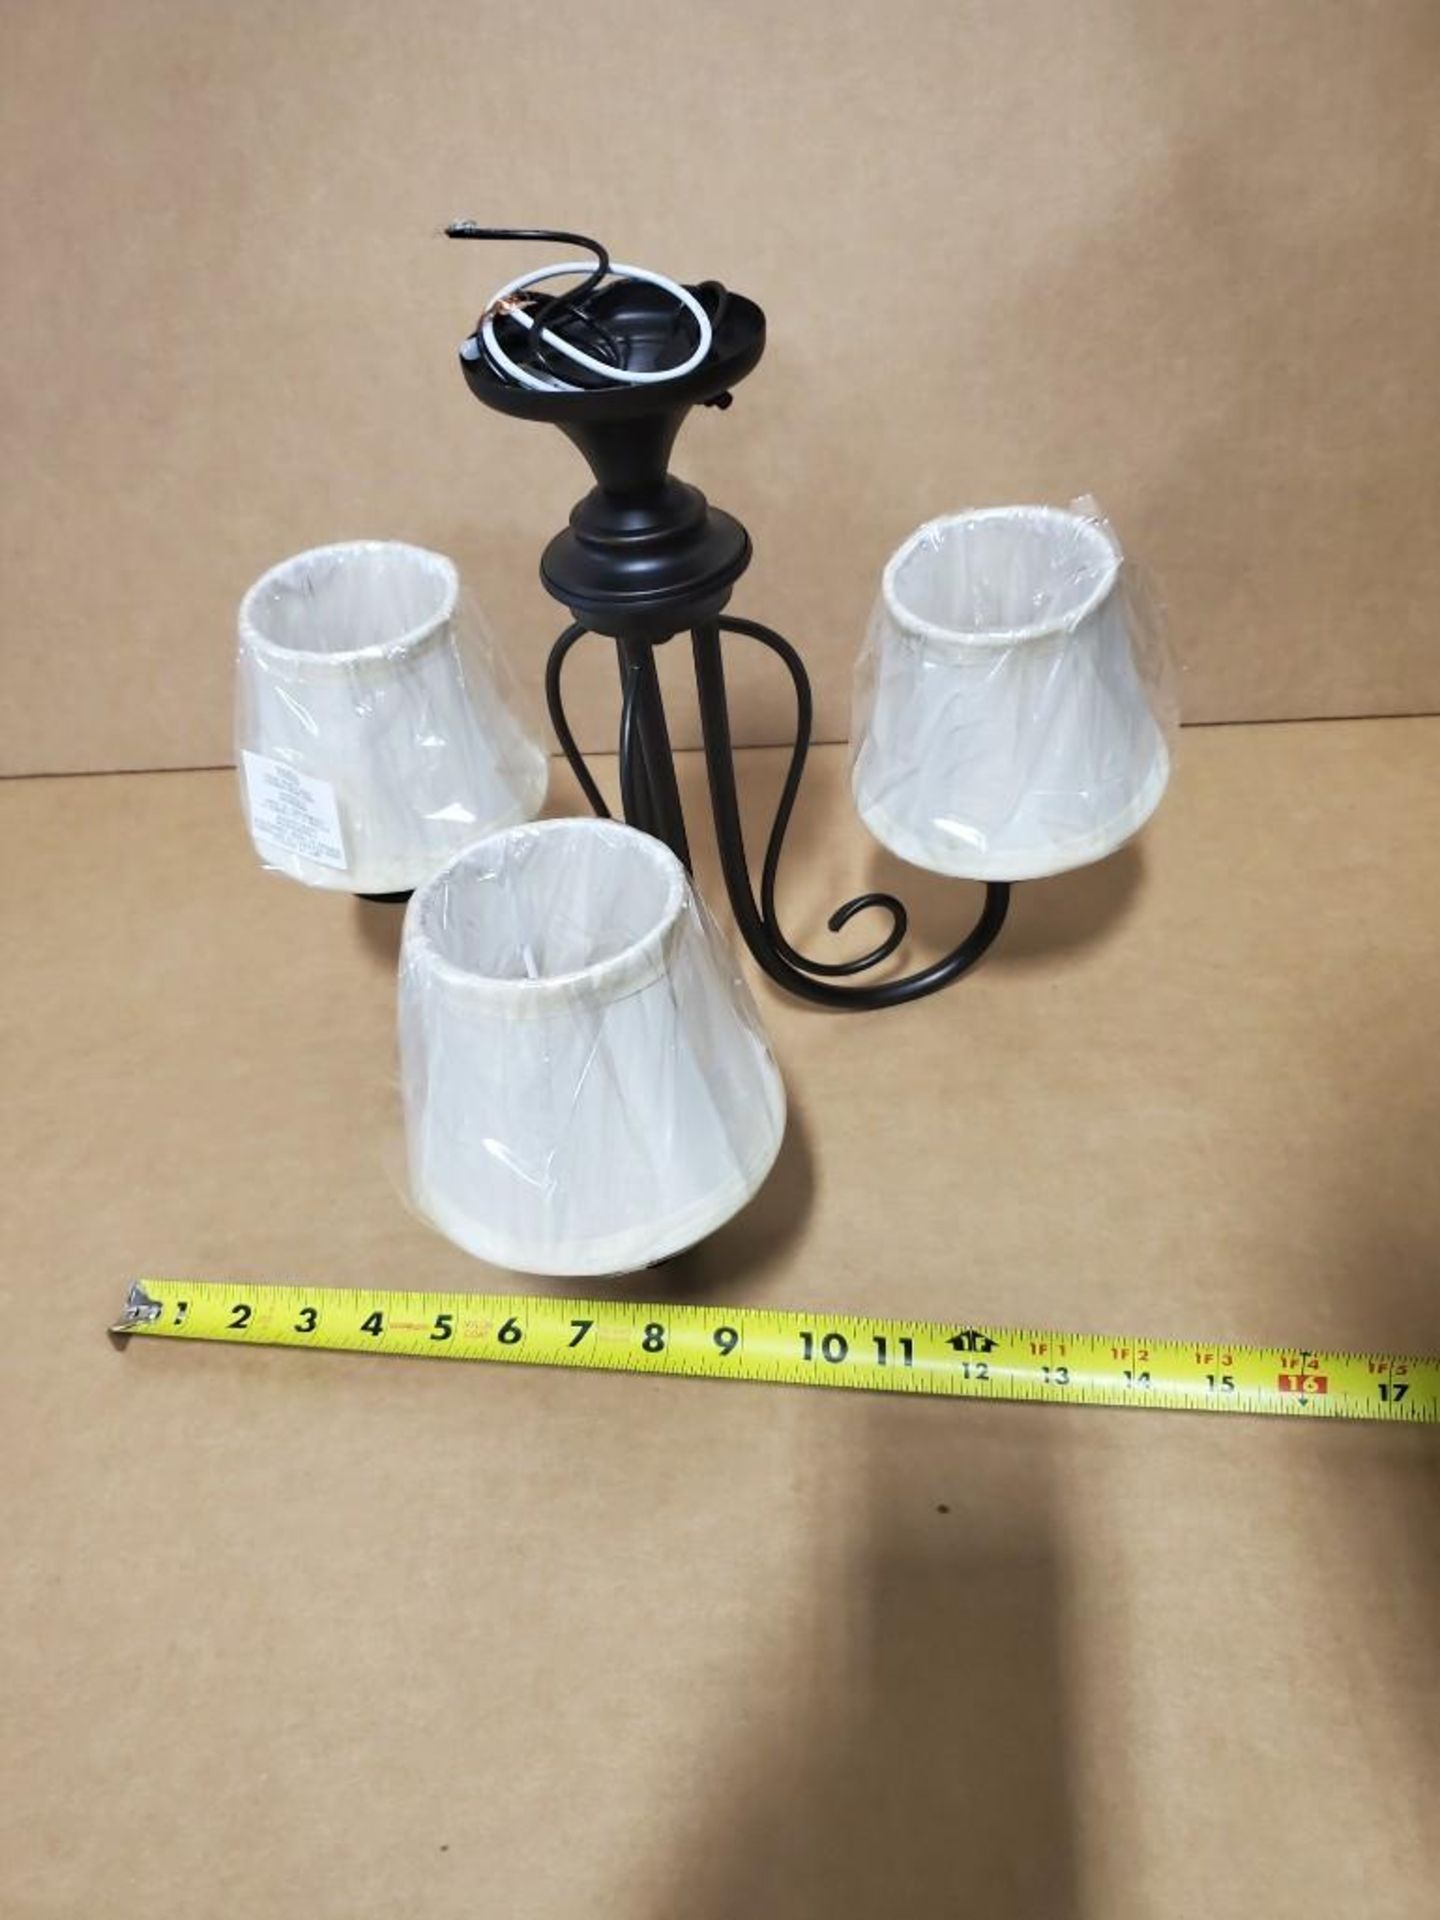 Qty 96 - SunLink 12 volt 3-light chandelier w/ shade. Part # RV-181303-744. New in bulk box. - Image 2 of 8